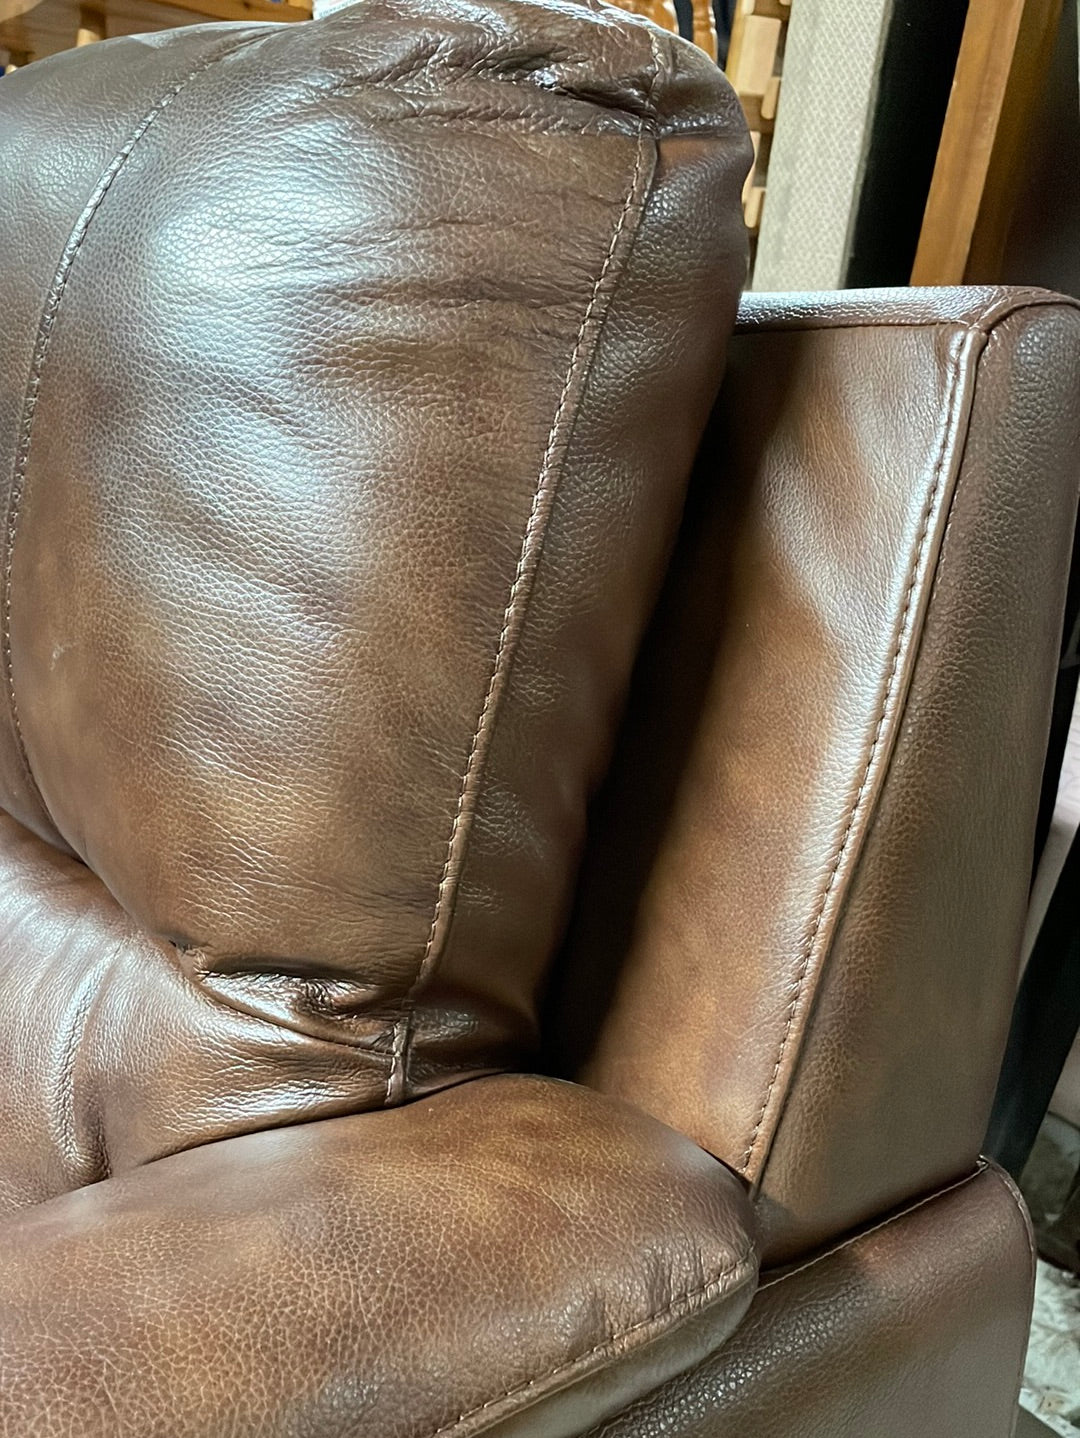 Real brown leather 3+2 sofa suite